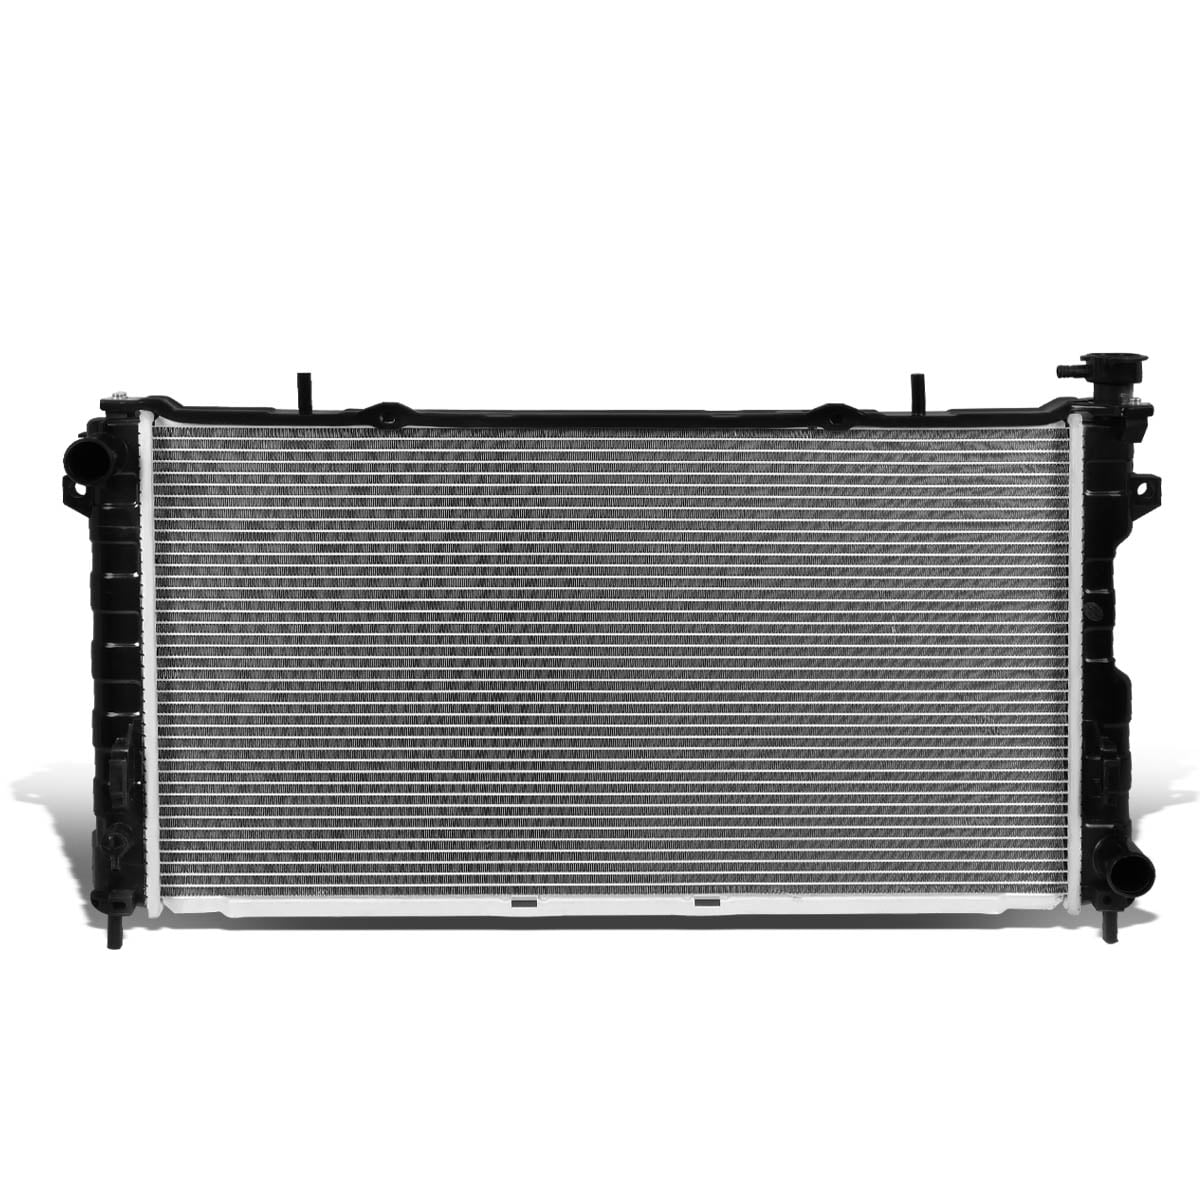 2311 Factory Style Aluminum Cooling Radiator Replacement for 01-04 Grand Voyager/Town&Country/Dodge Caravan 3.3L/3.8L AT